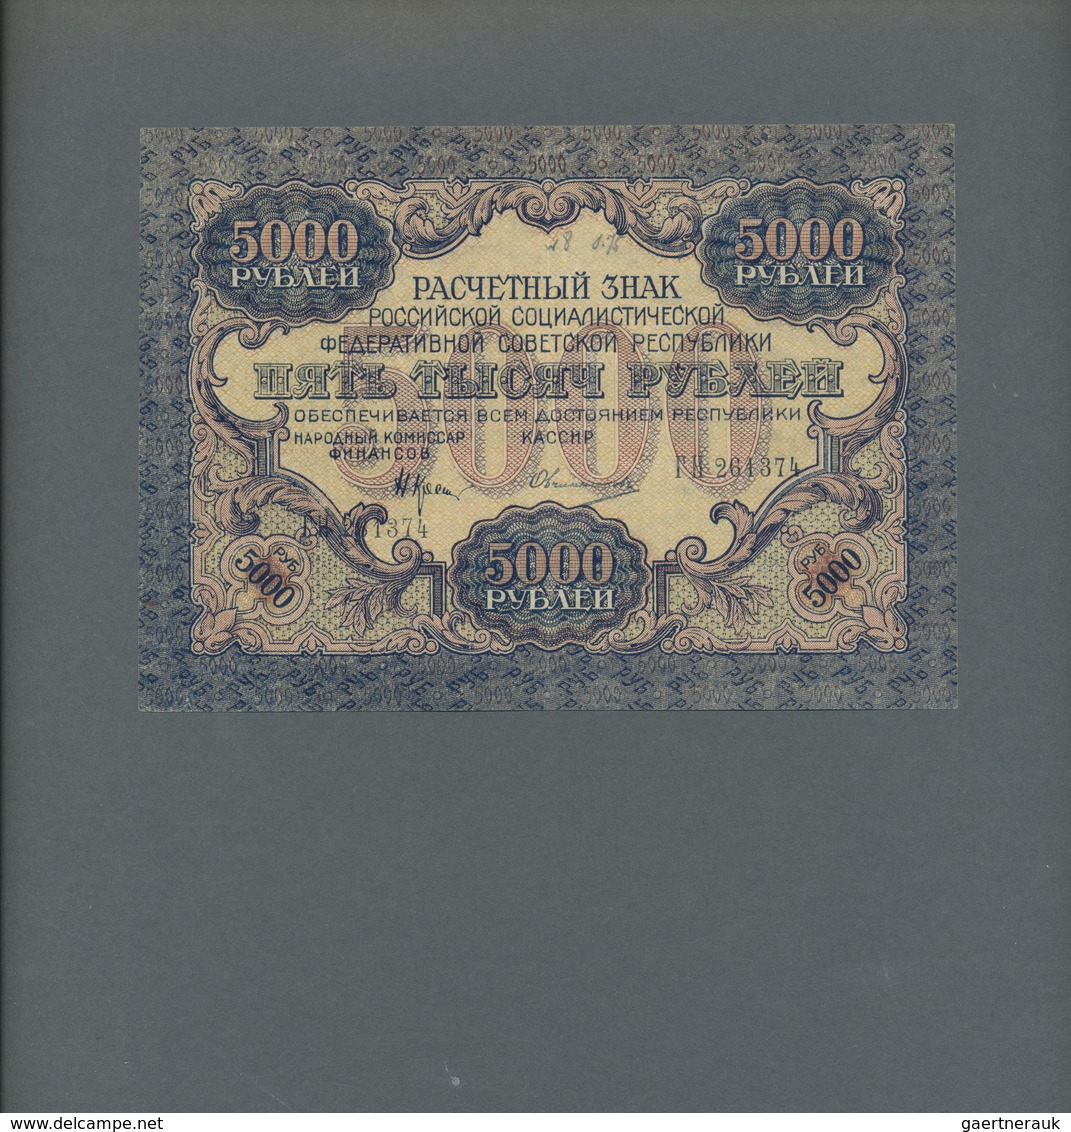 Russia / Russland: 5000 Rubles 1919 P. 105a, Used With Light Folds And Creases, No Holes Or Tears, C - Russia